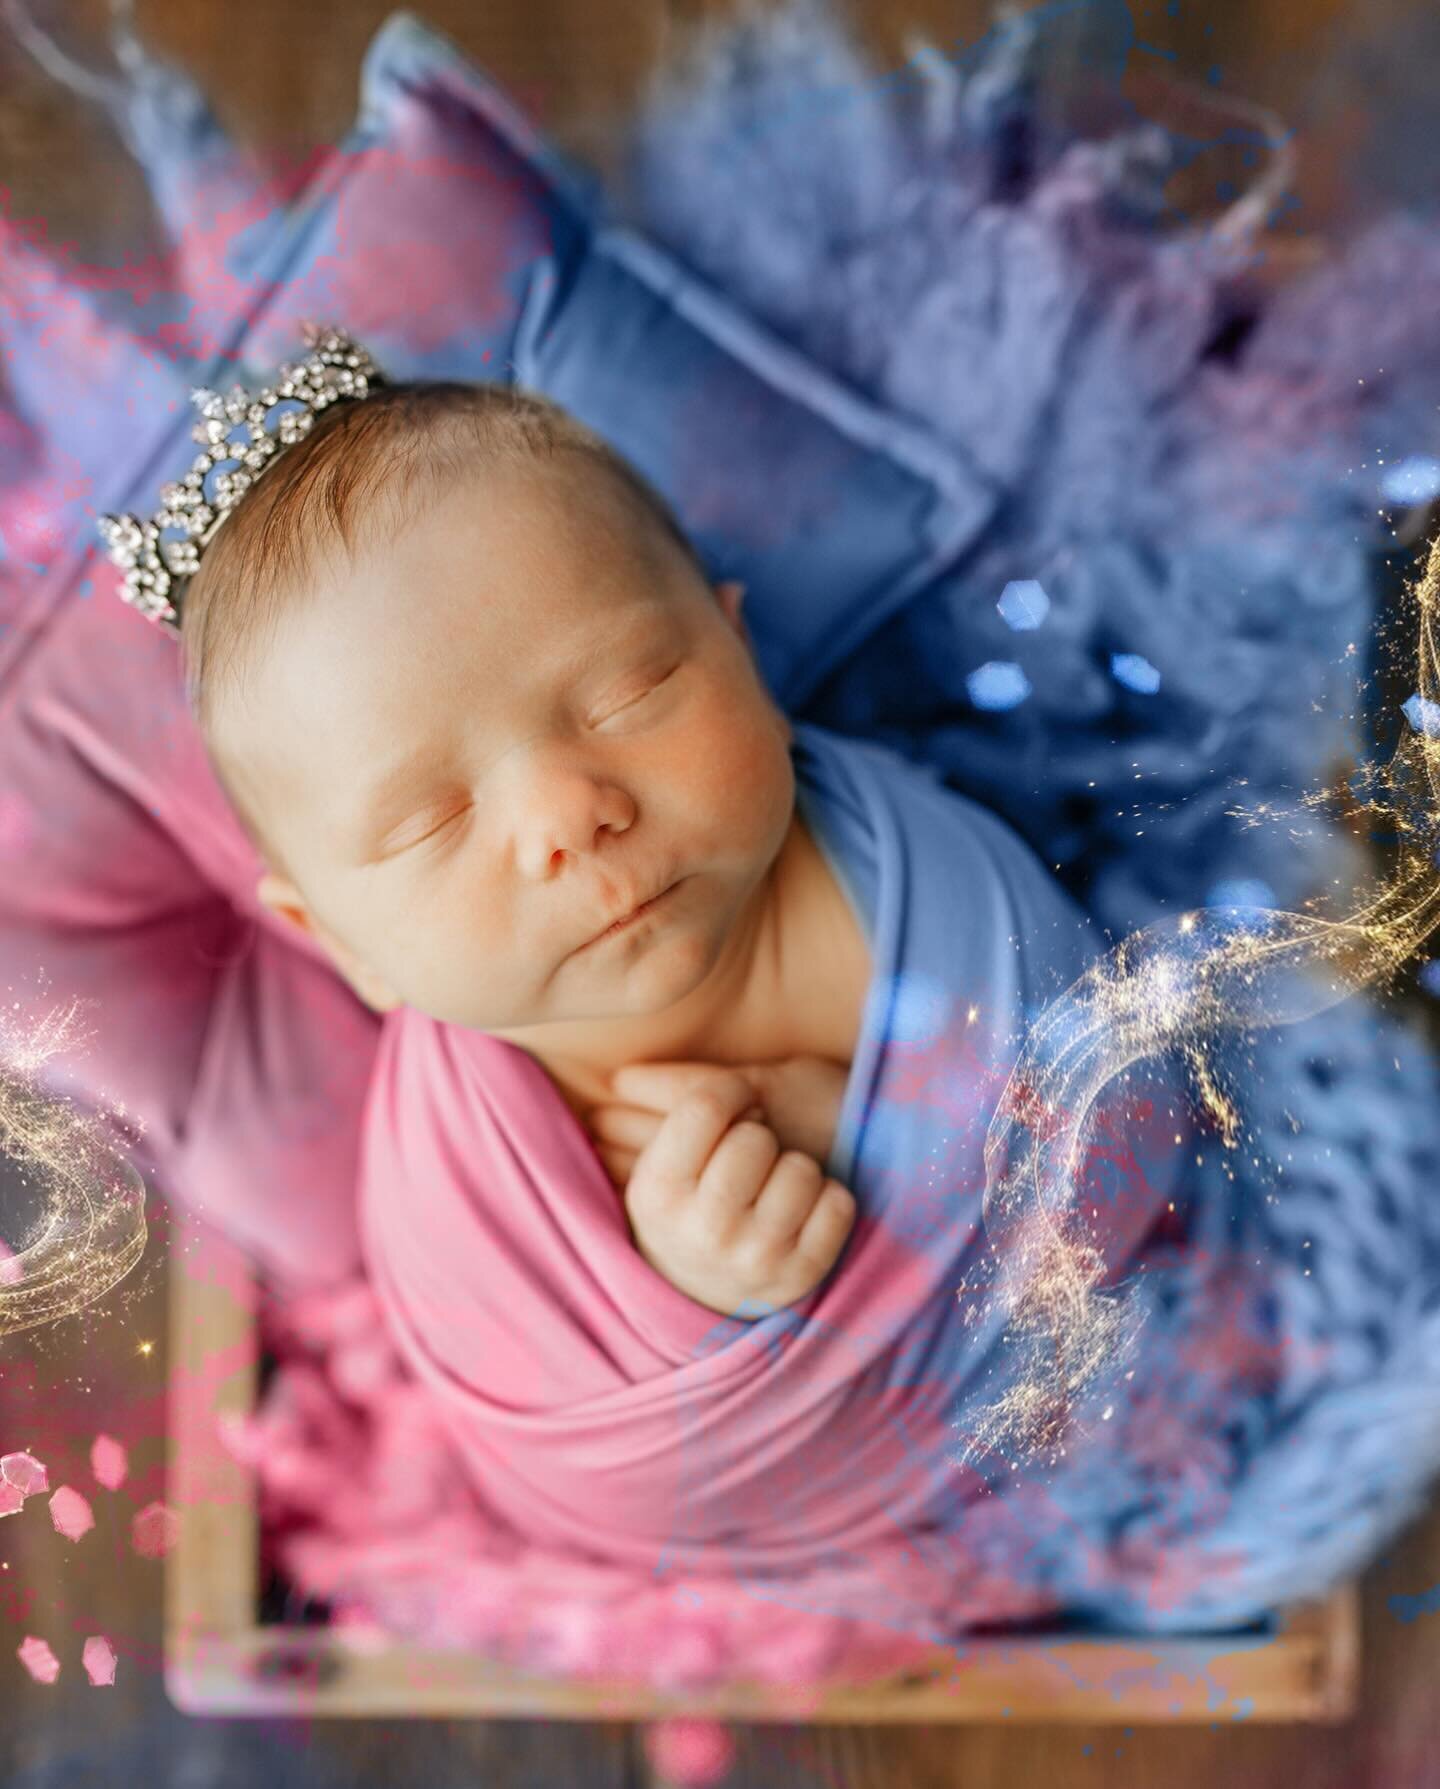 You remember little Aurora?  My fav #disney movie #sleepingbeauty was a must for her newborn session&hellip; so of course it had to be replicated for her 6 month session!  Swipe to see!!!

.
.
.
#sleepingbeauty #princessaurora #sleepingbeautycosplay 